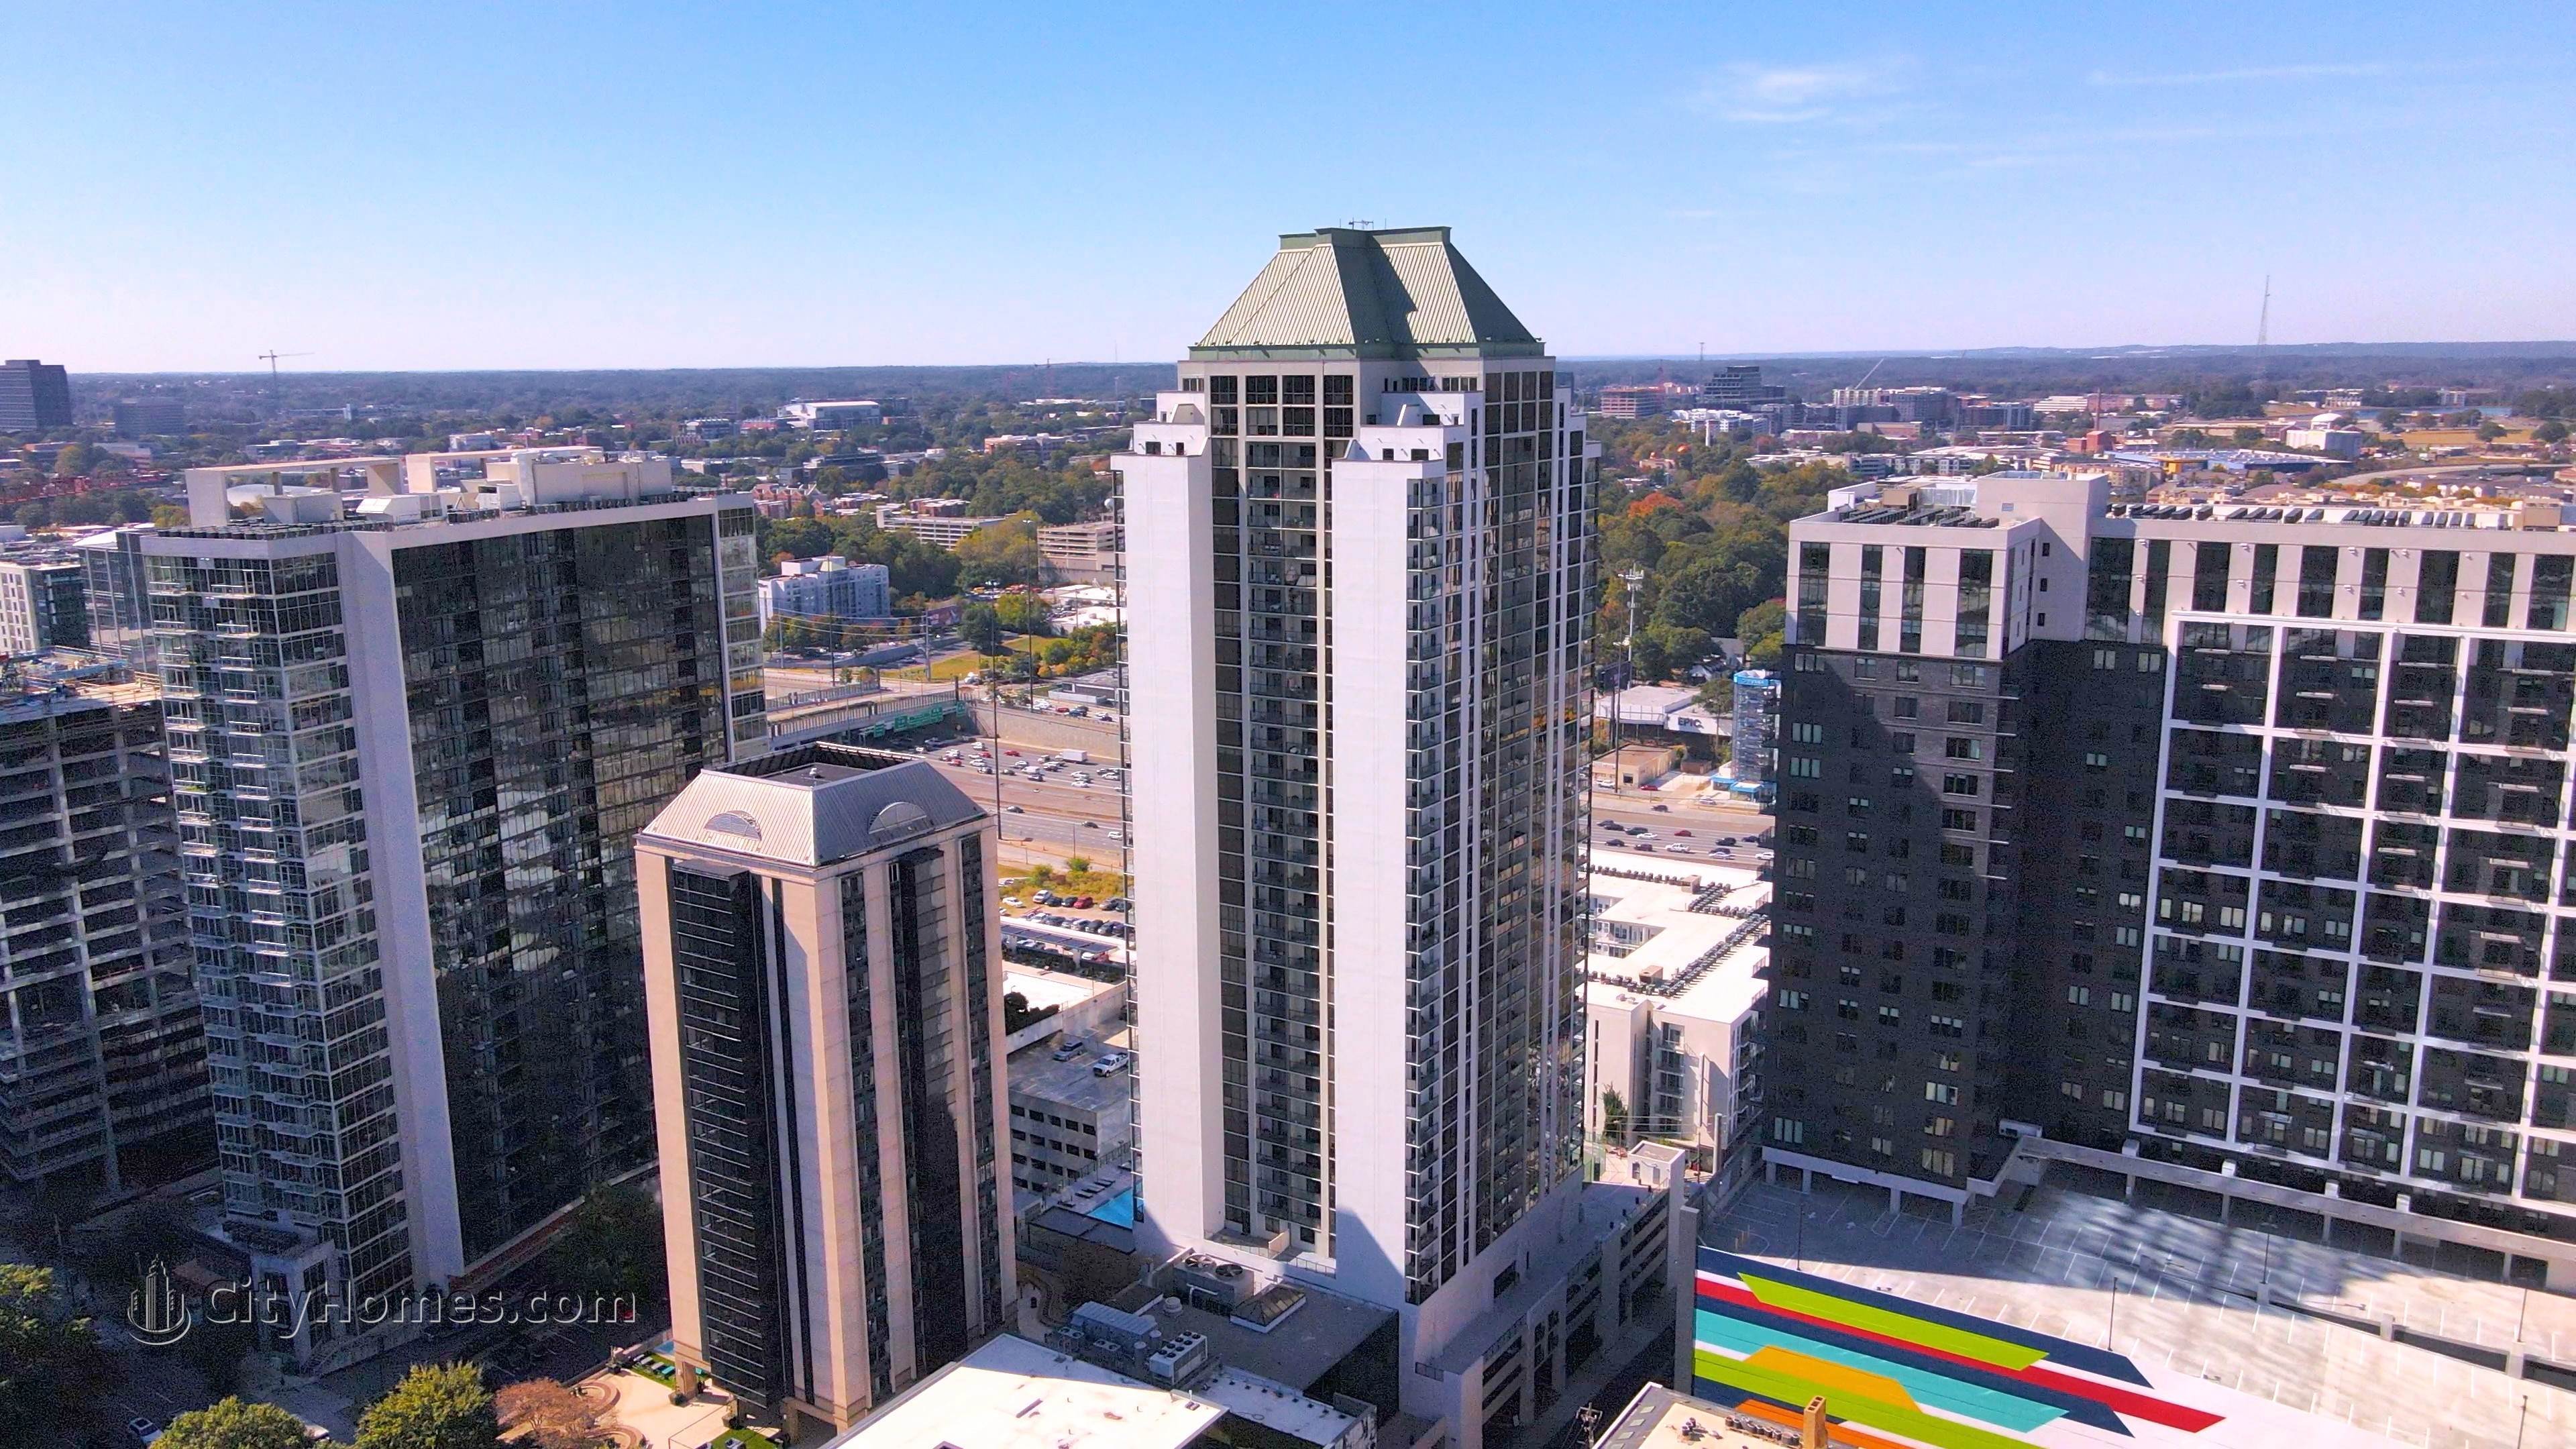 4. 1280 West Condos building at 1280 West Peachtree St NW, Greater Midtown, Atlanta, GA 30309